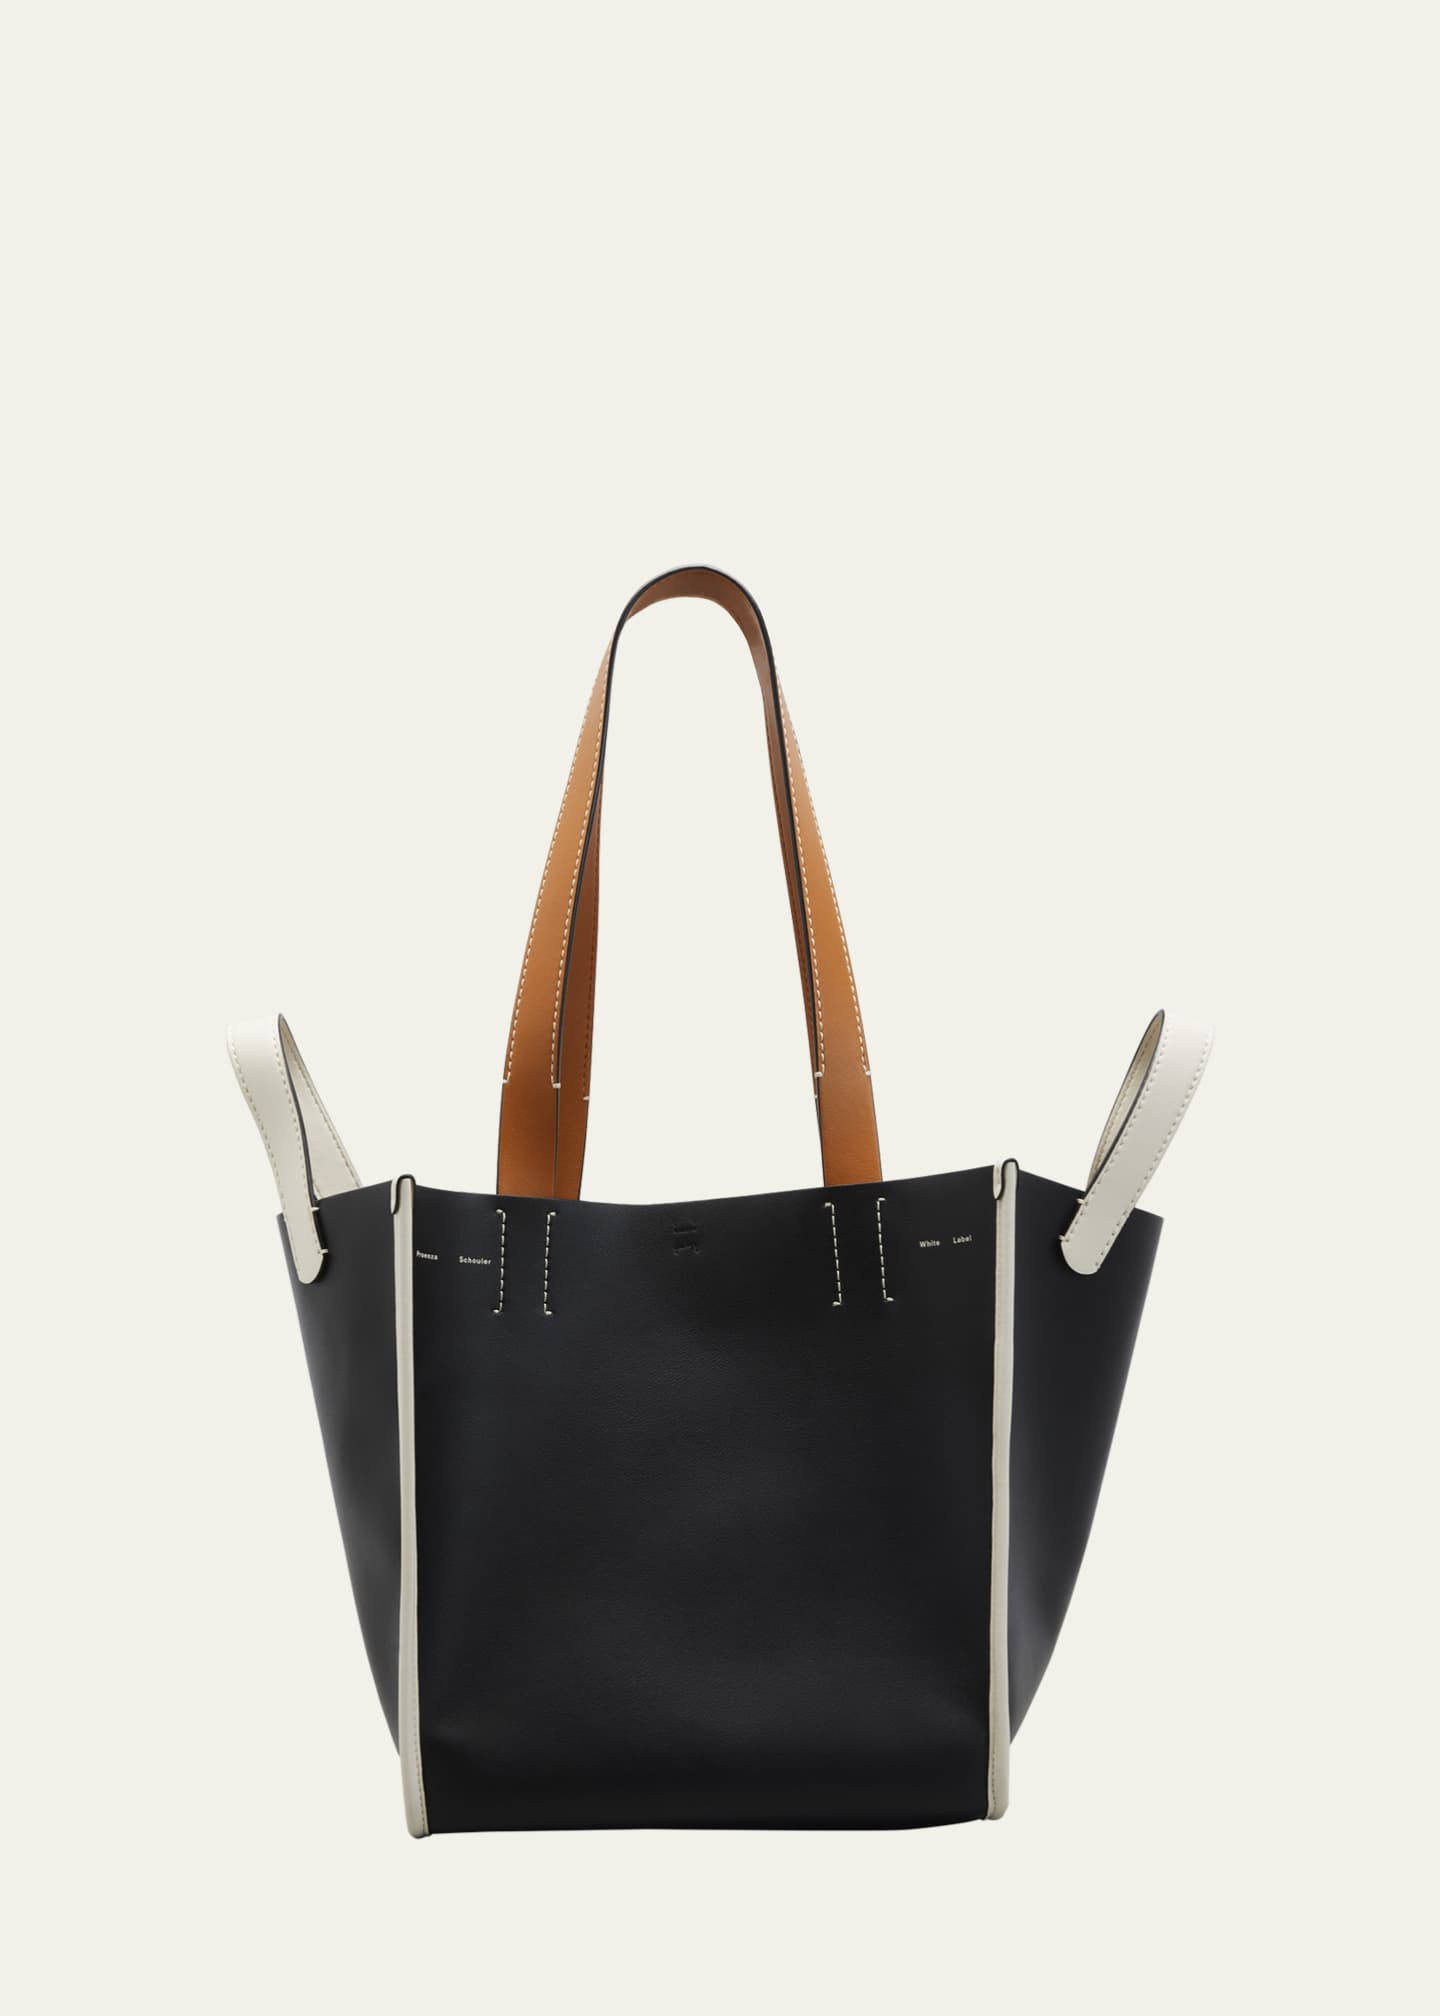 Proenza Schouler White Label Mercer Large Colorblock Leather Tote Bag ...